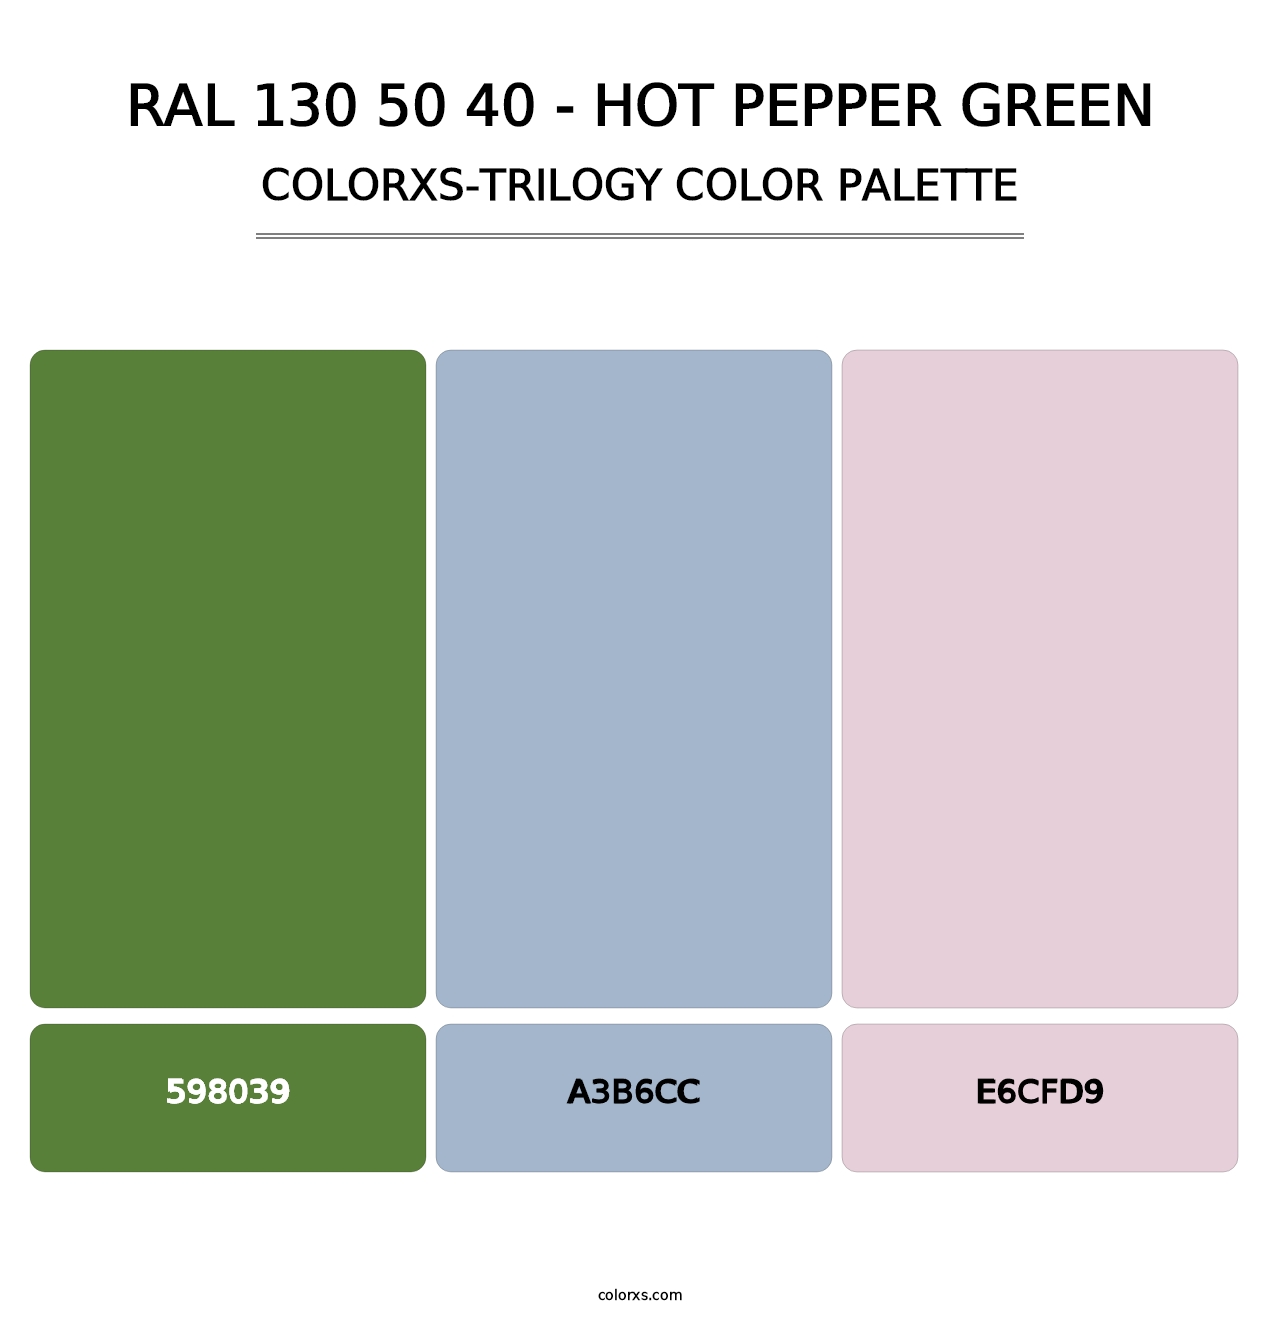 RAL 130 50 40 - Hot Pepper Green - Colorxs Trilogy Palette